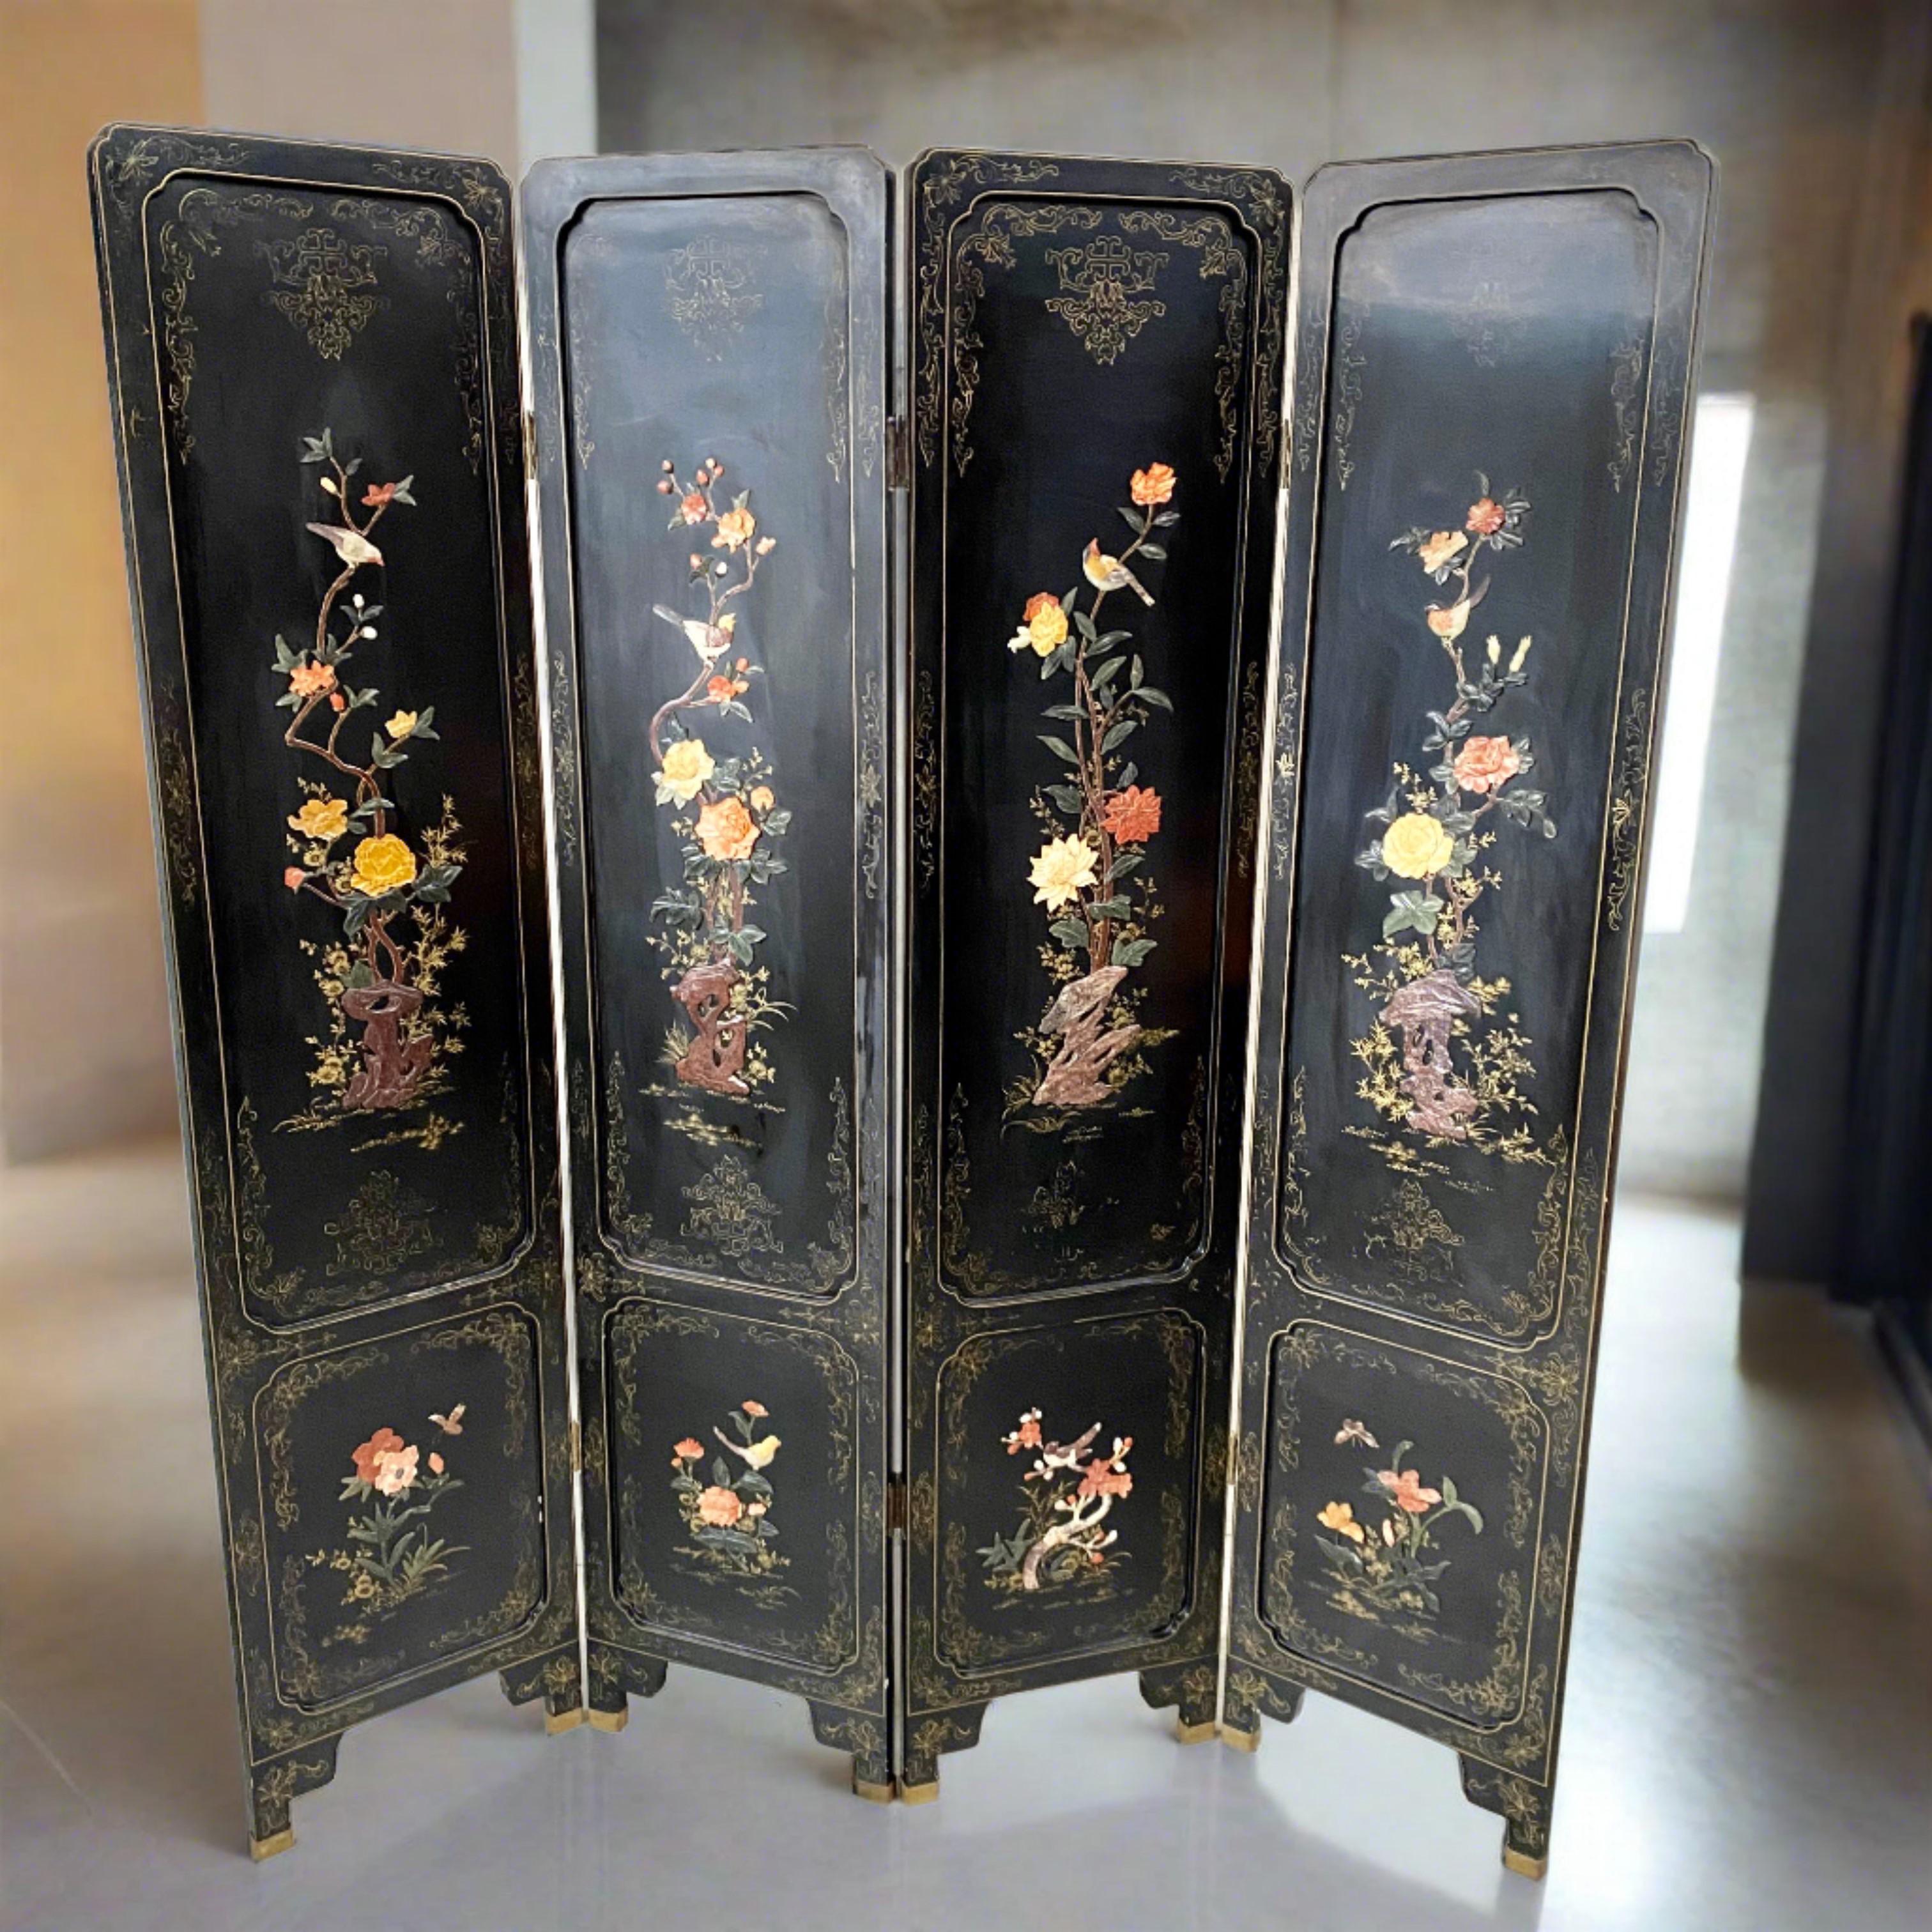 Looking for a statement piece to elevate your living space? Look no further than this midcentury Chinese 4 Panel Carved Soapstone Brutalist Room Divider Screen!

hand carved with intricate floral prints and featuring stunning depictions of birds,